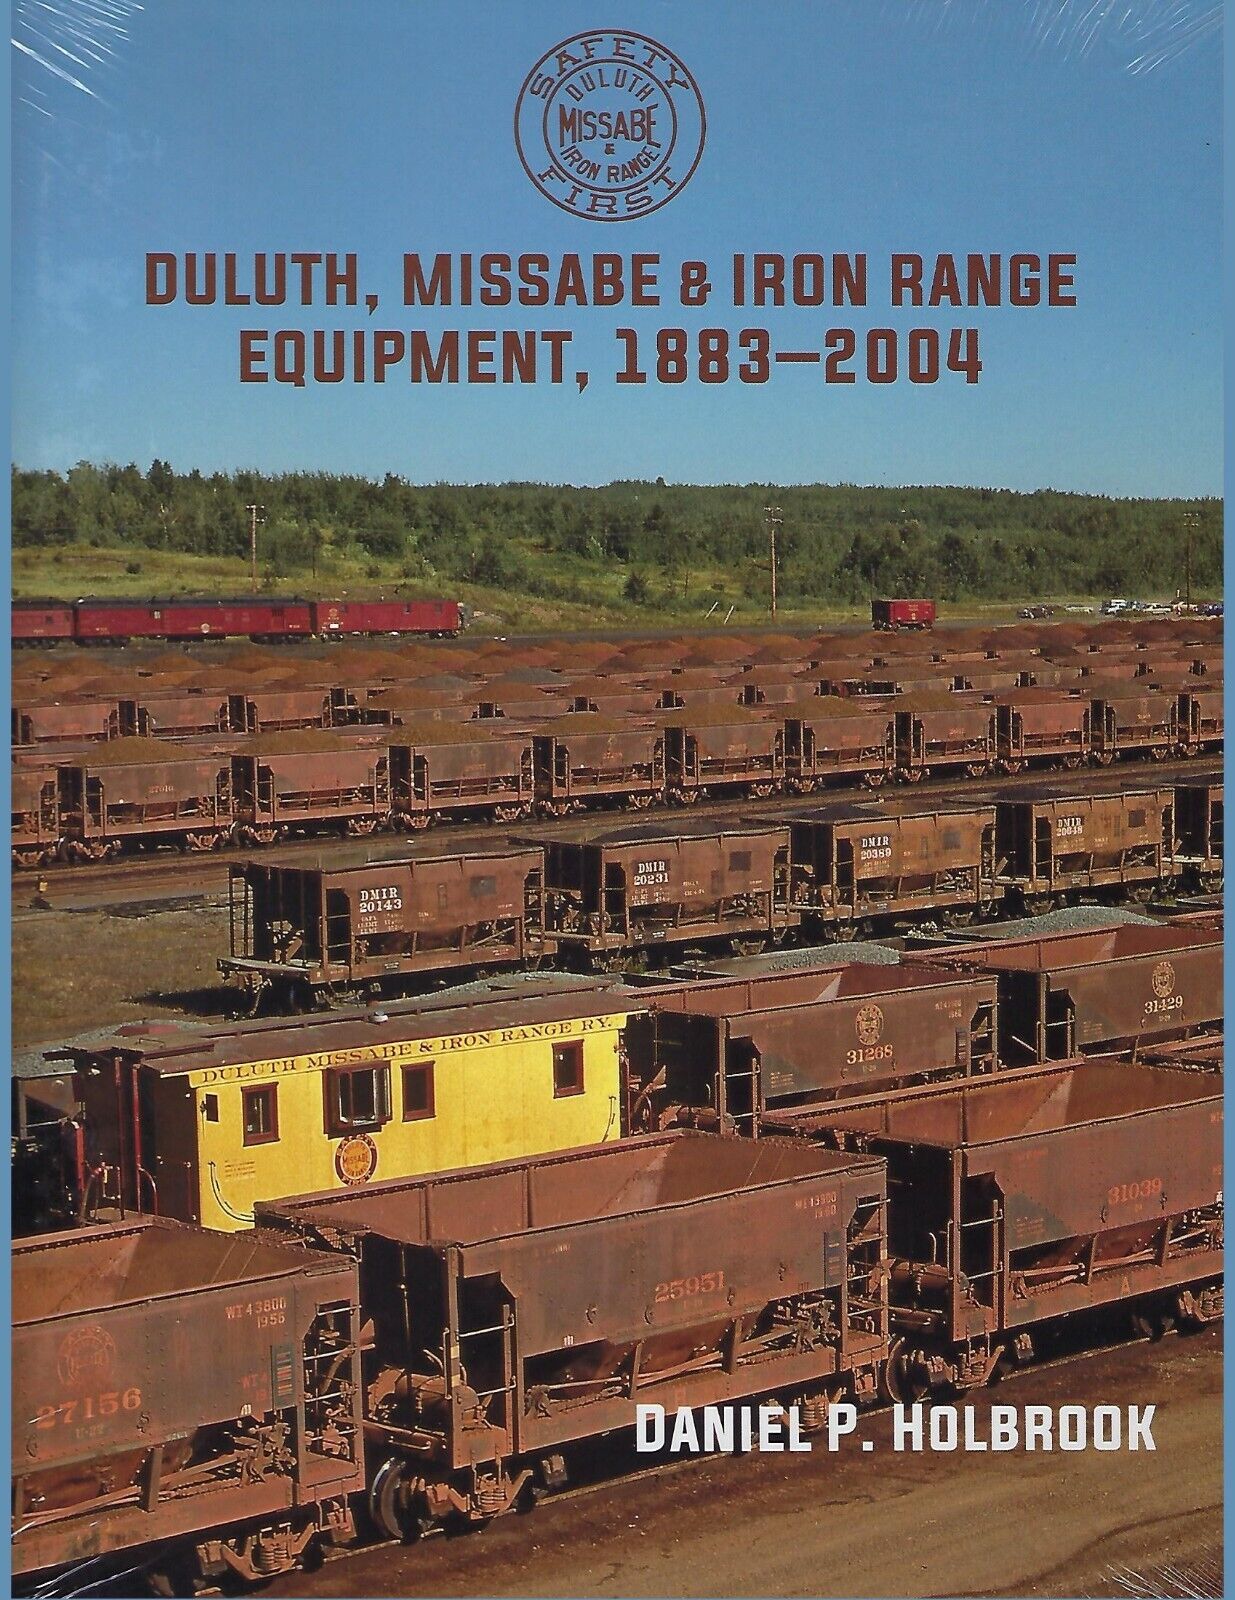 DULUTH, MISSABE & IRON RANGE Equipment, 1883-2004  (Out of Print BRAND NEW BOOK)